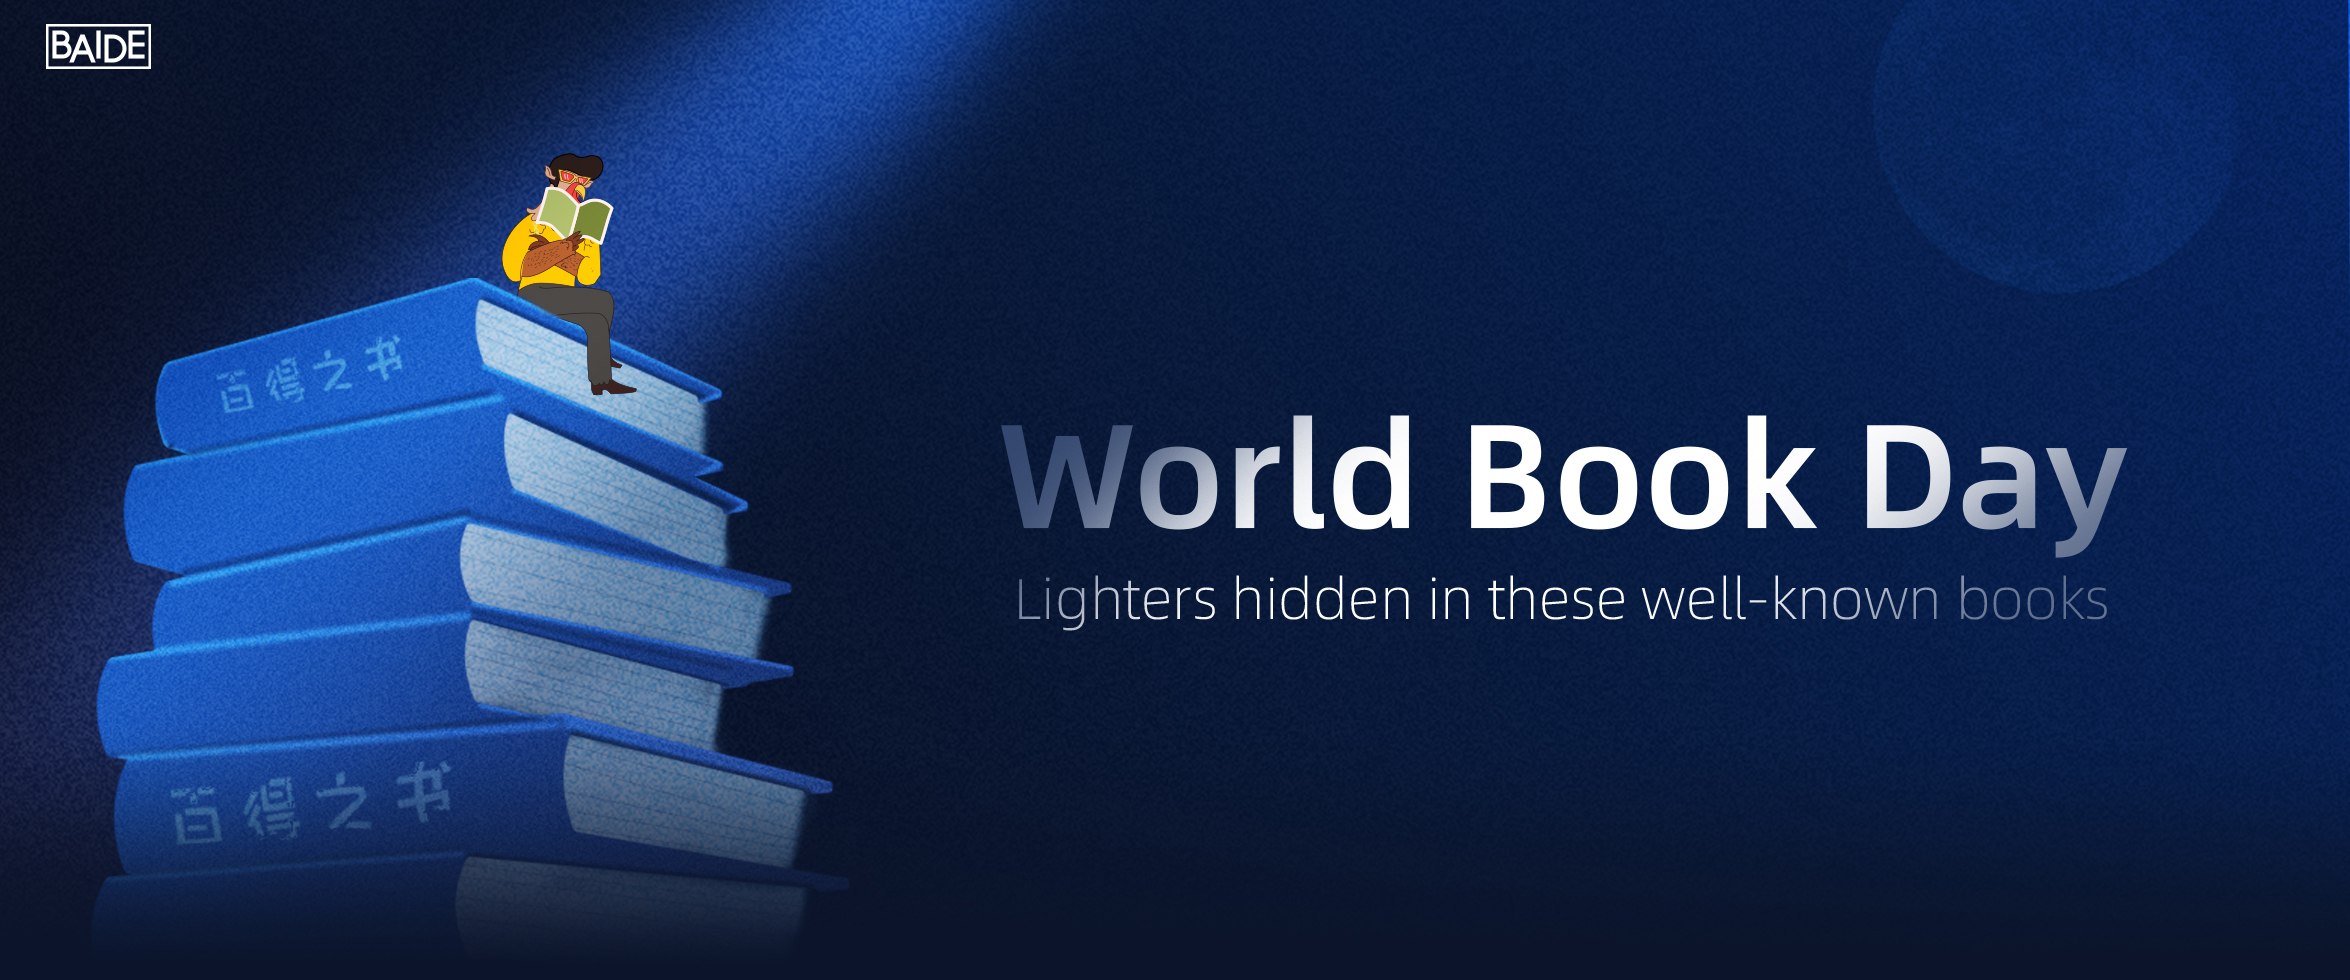 World Book Day：Lighters hidden in these well-known books